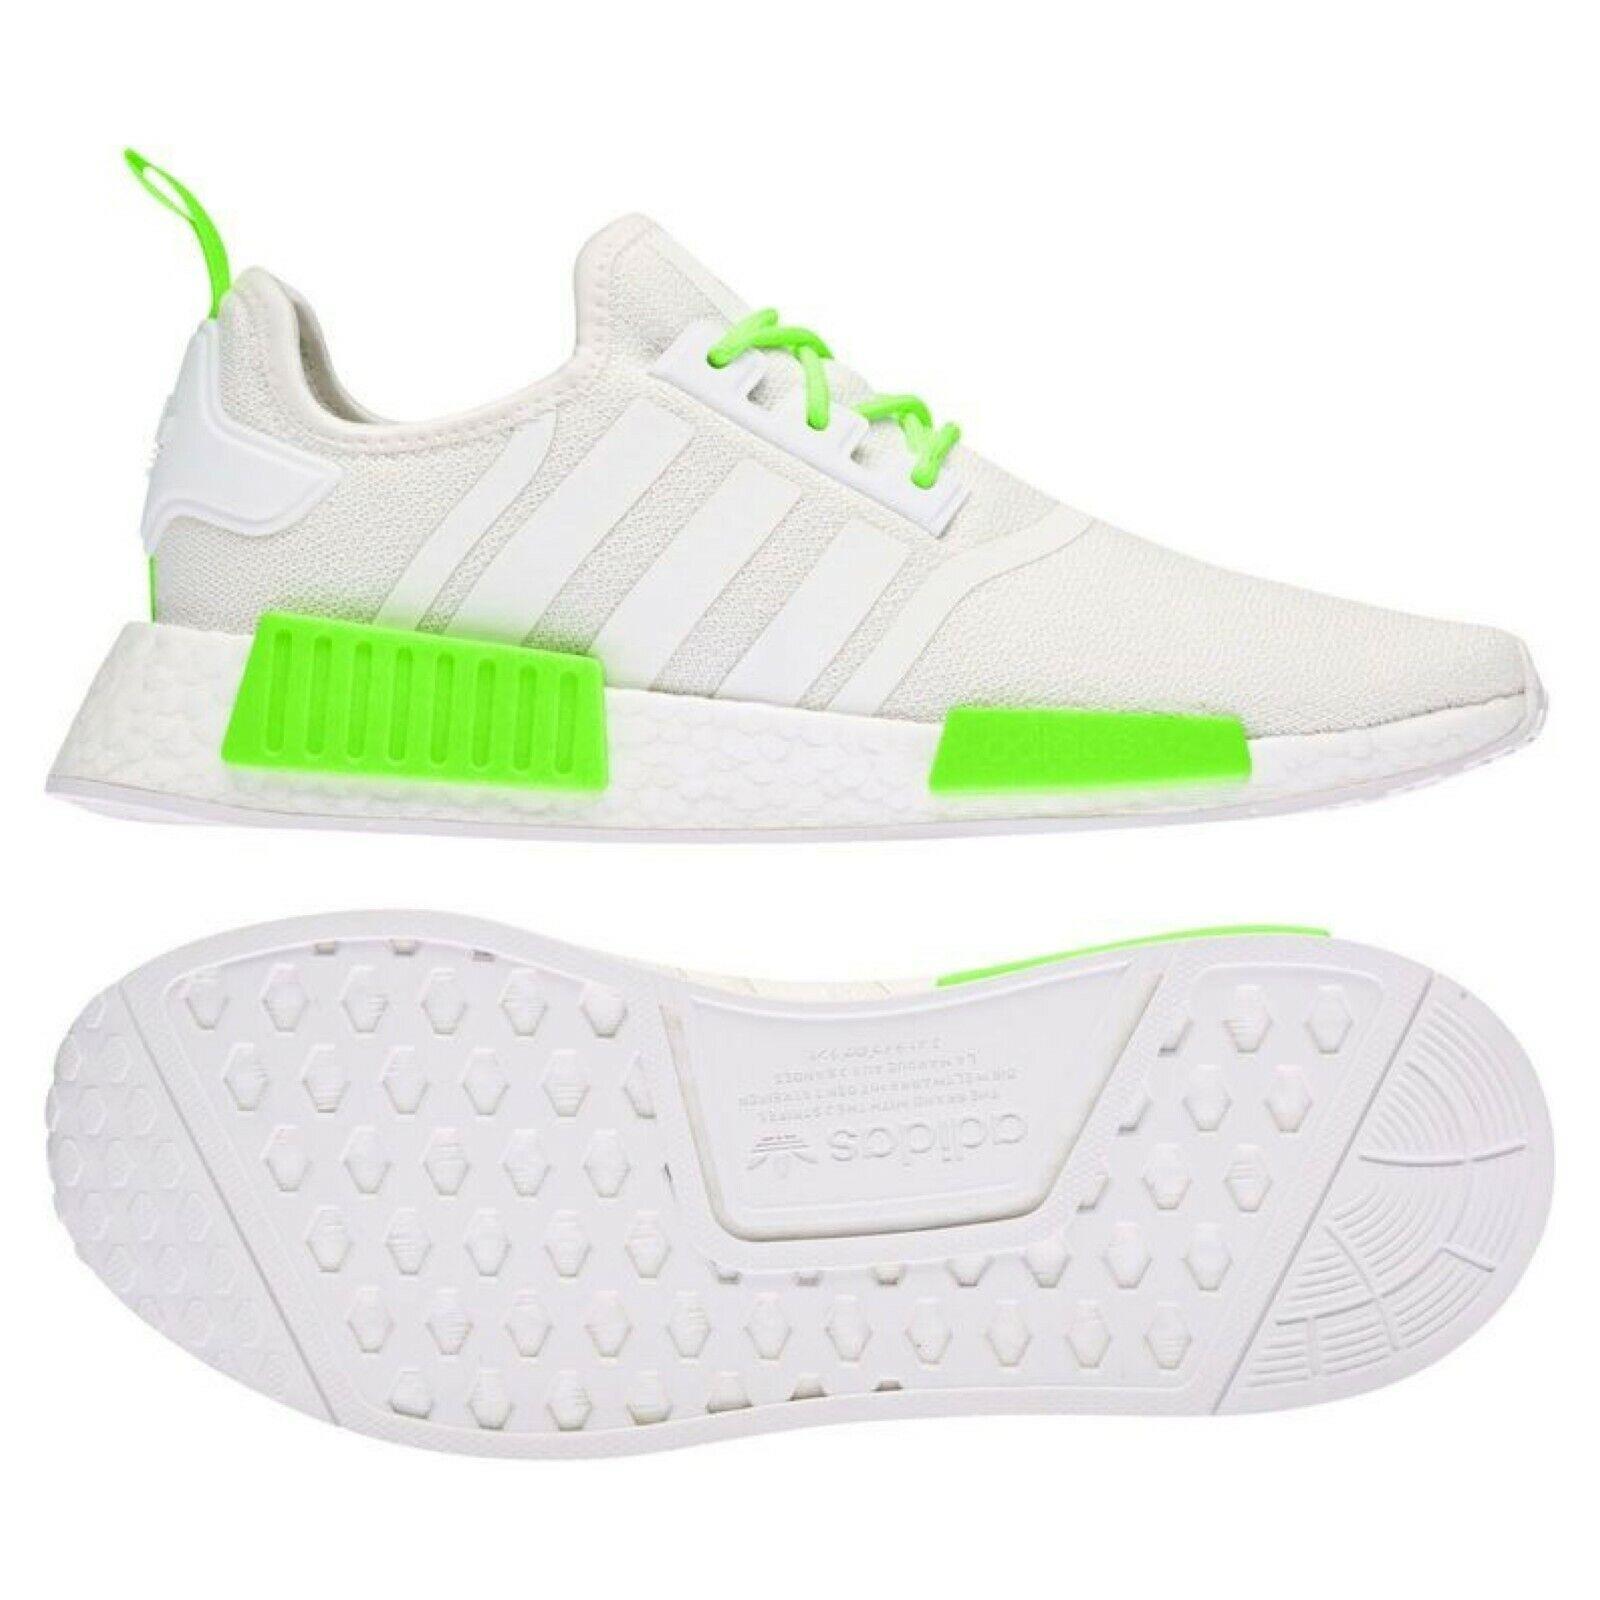 Adidas shoes NMD - Gray , GREY/NEON GREEN Manufacturer 1